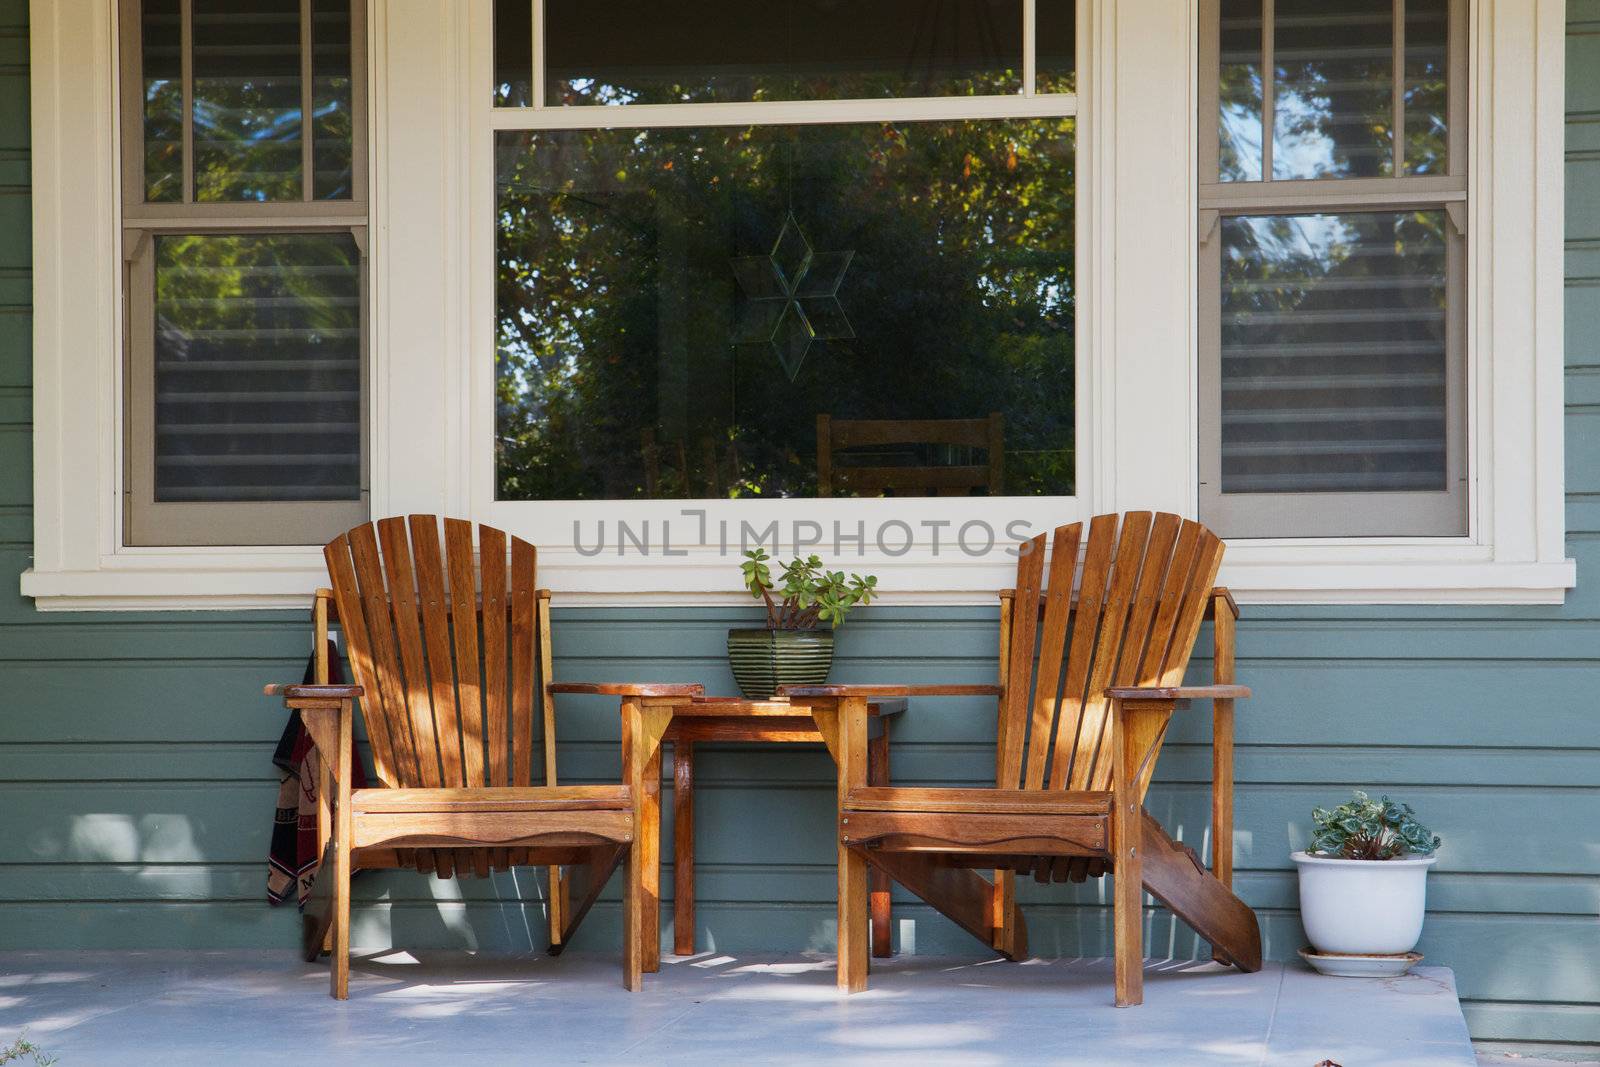 Two adirondack chairs on a porch with picture window background